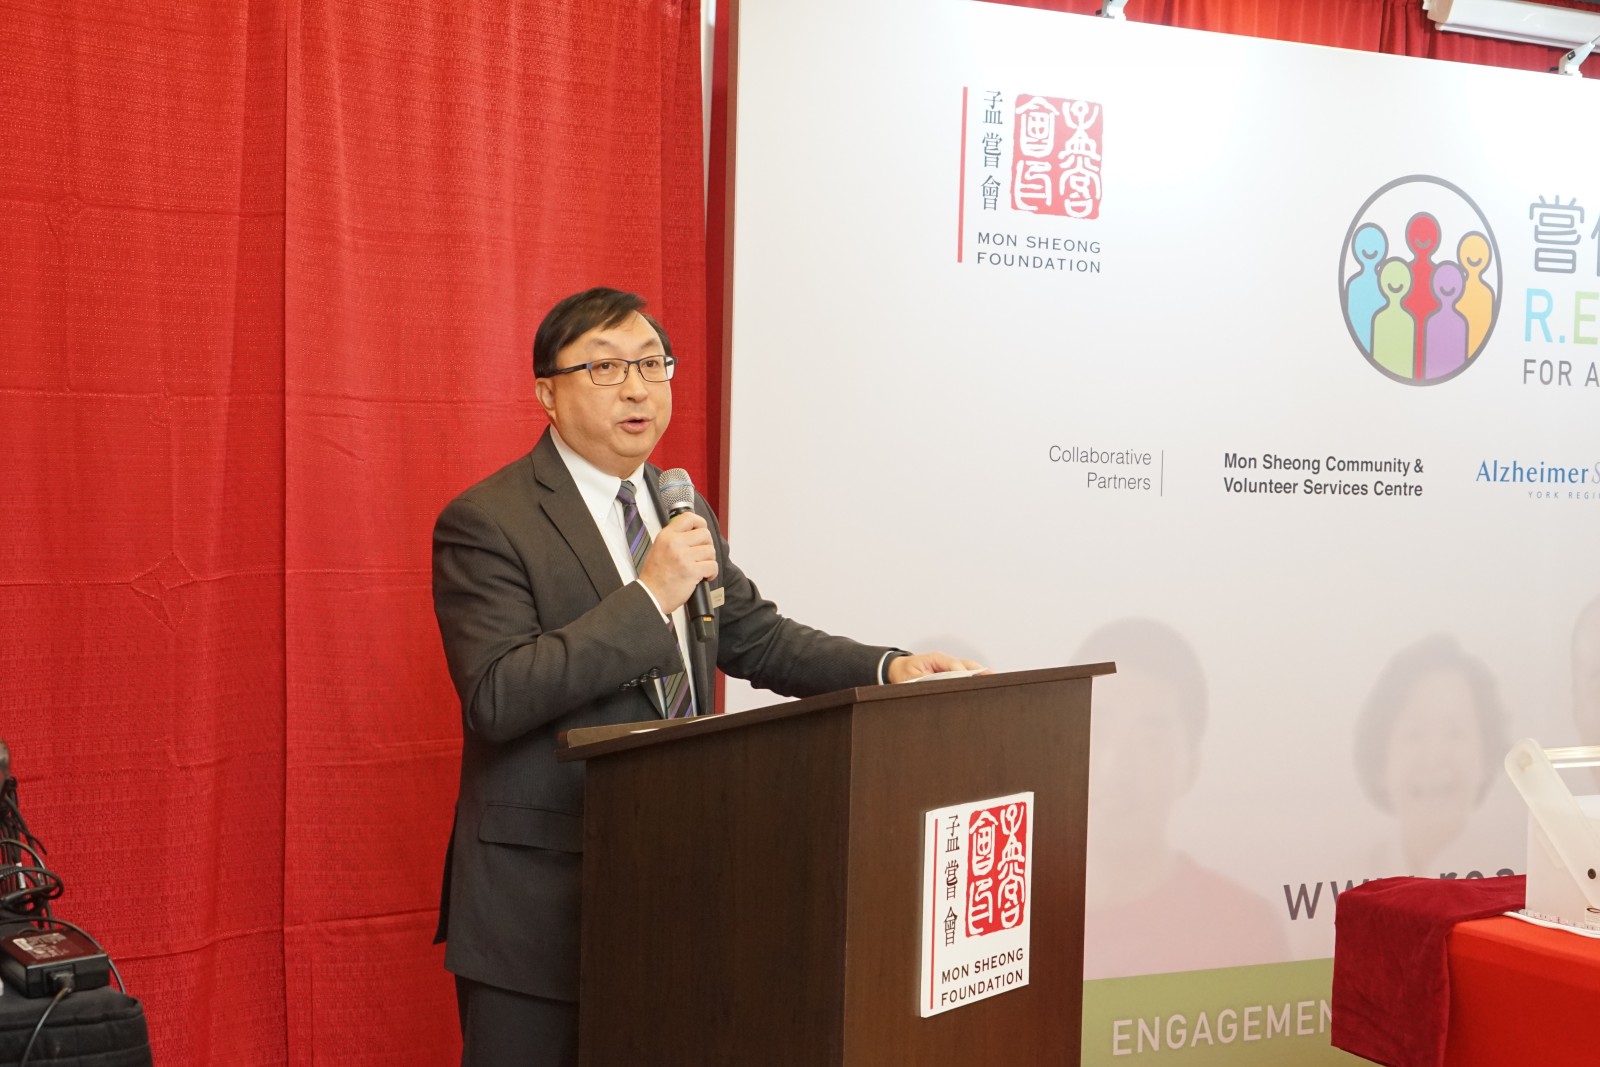 Welcome speech by David Cheng, Vice-President of Mon Sheong Foundation